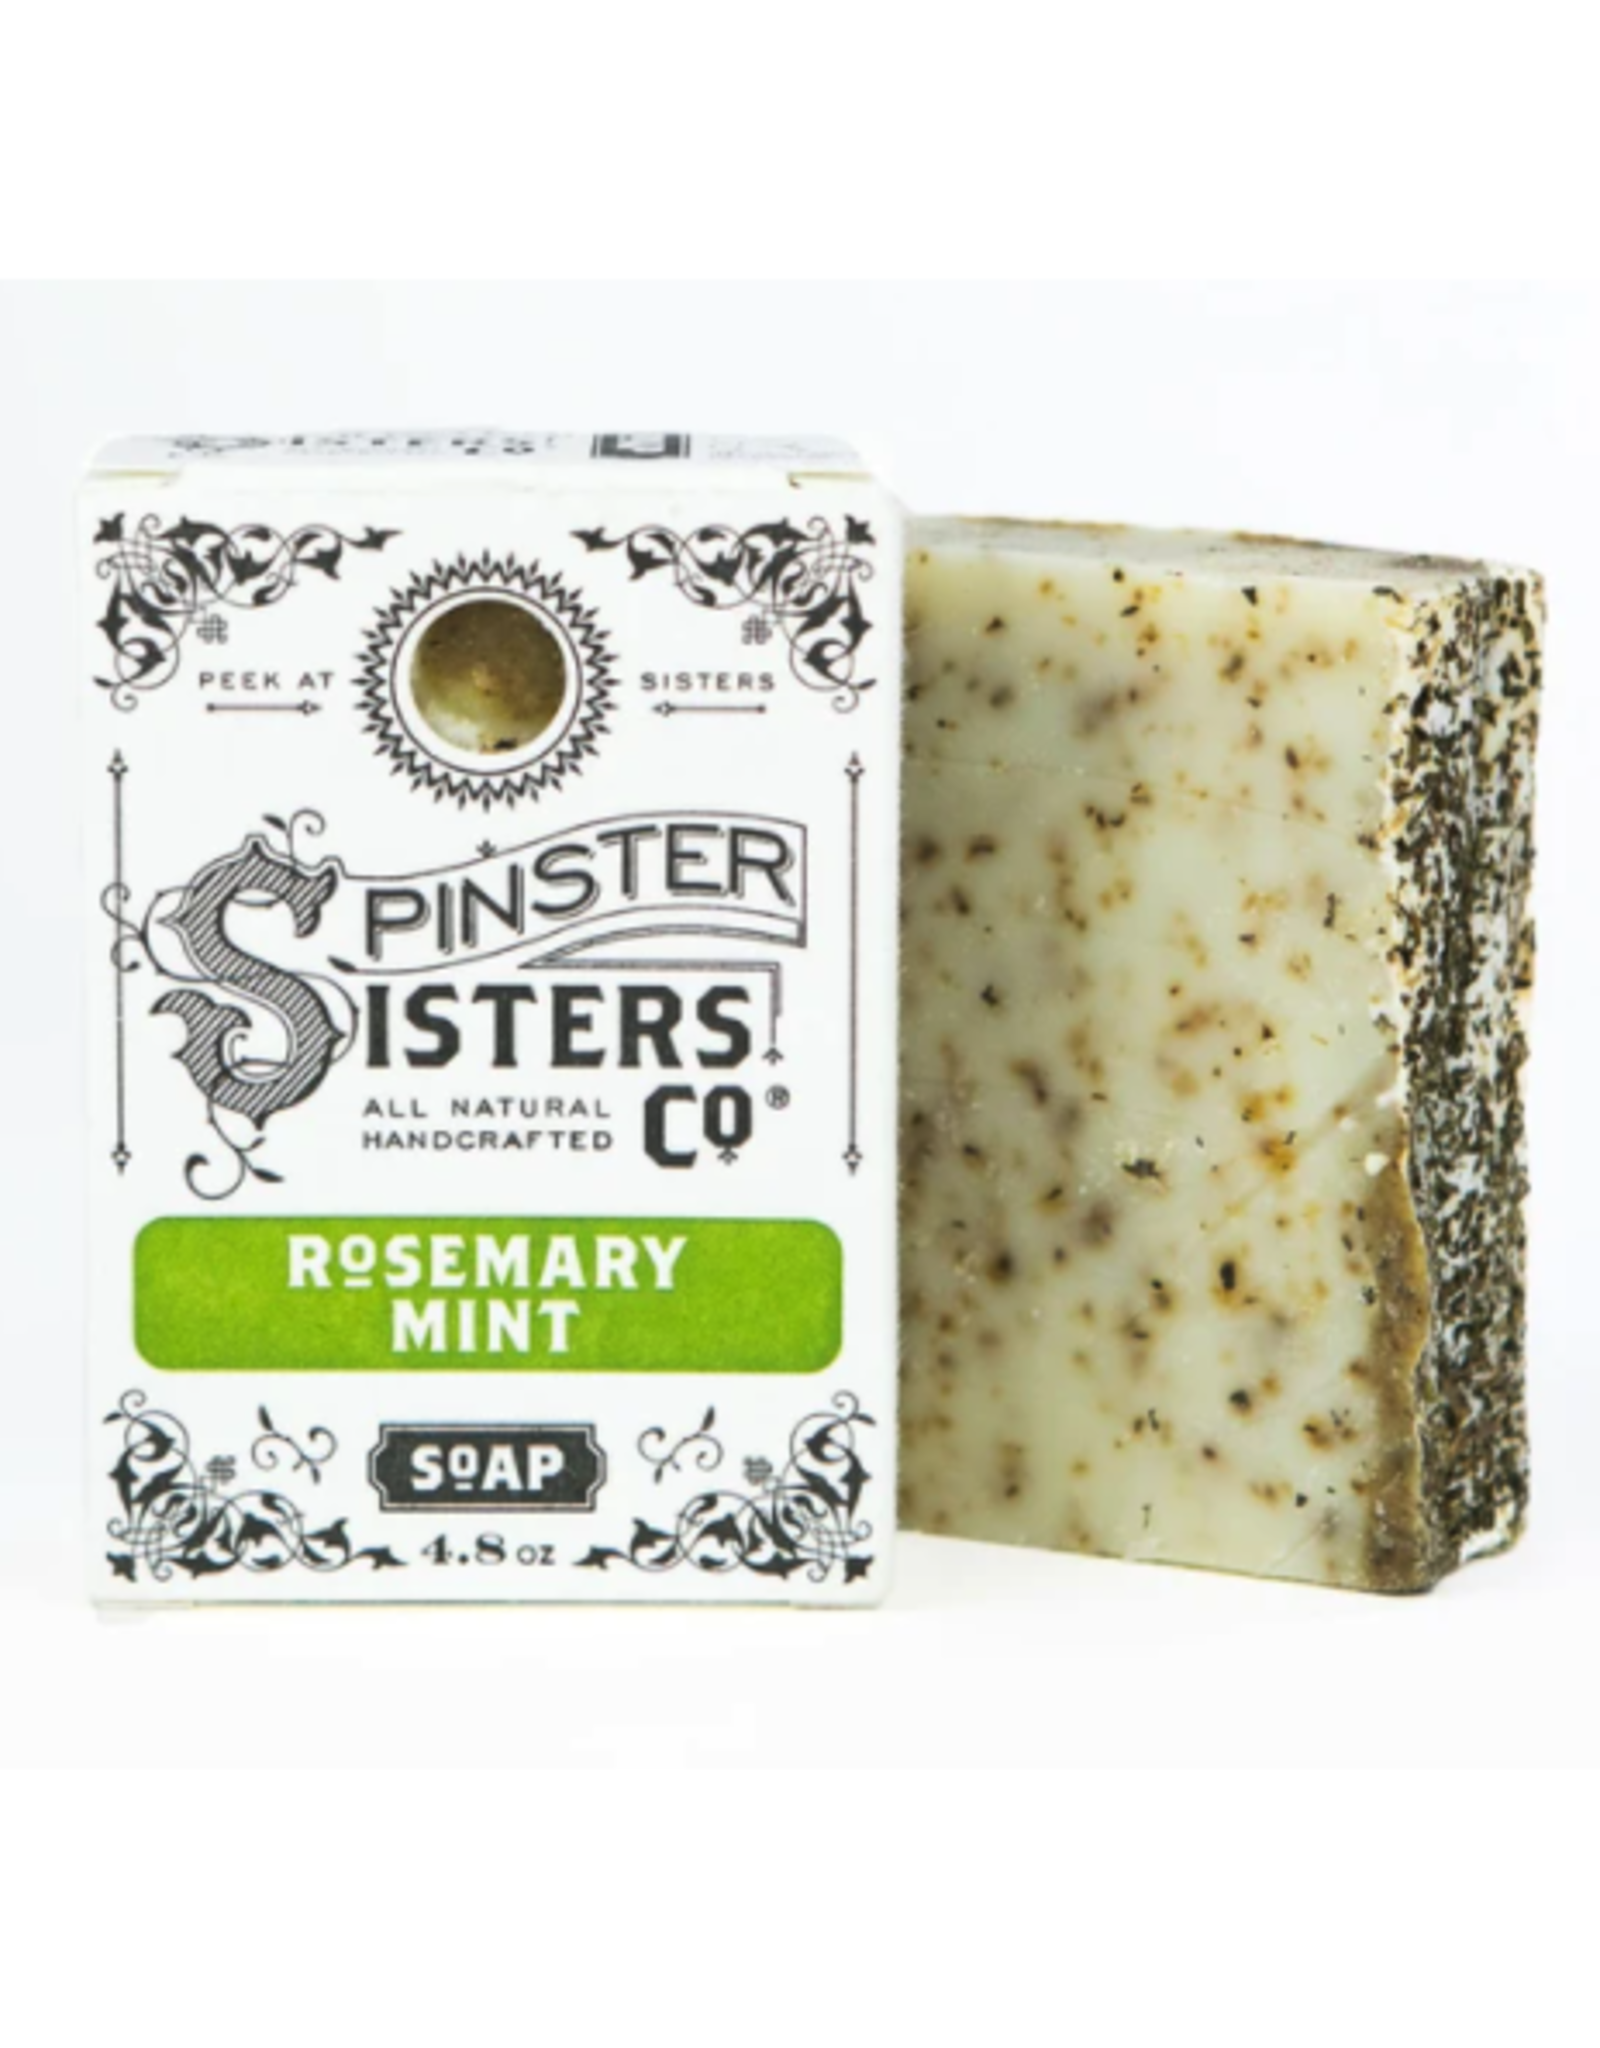 Spinster Sisters Rosemary Mint Signature Bath Soap